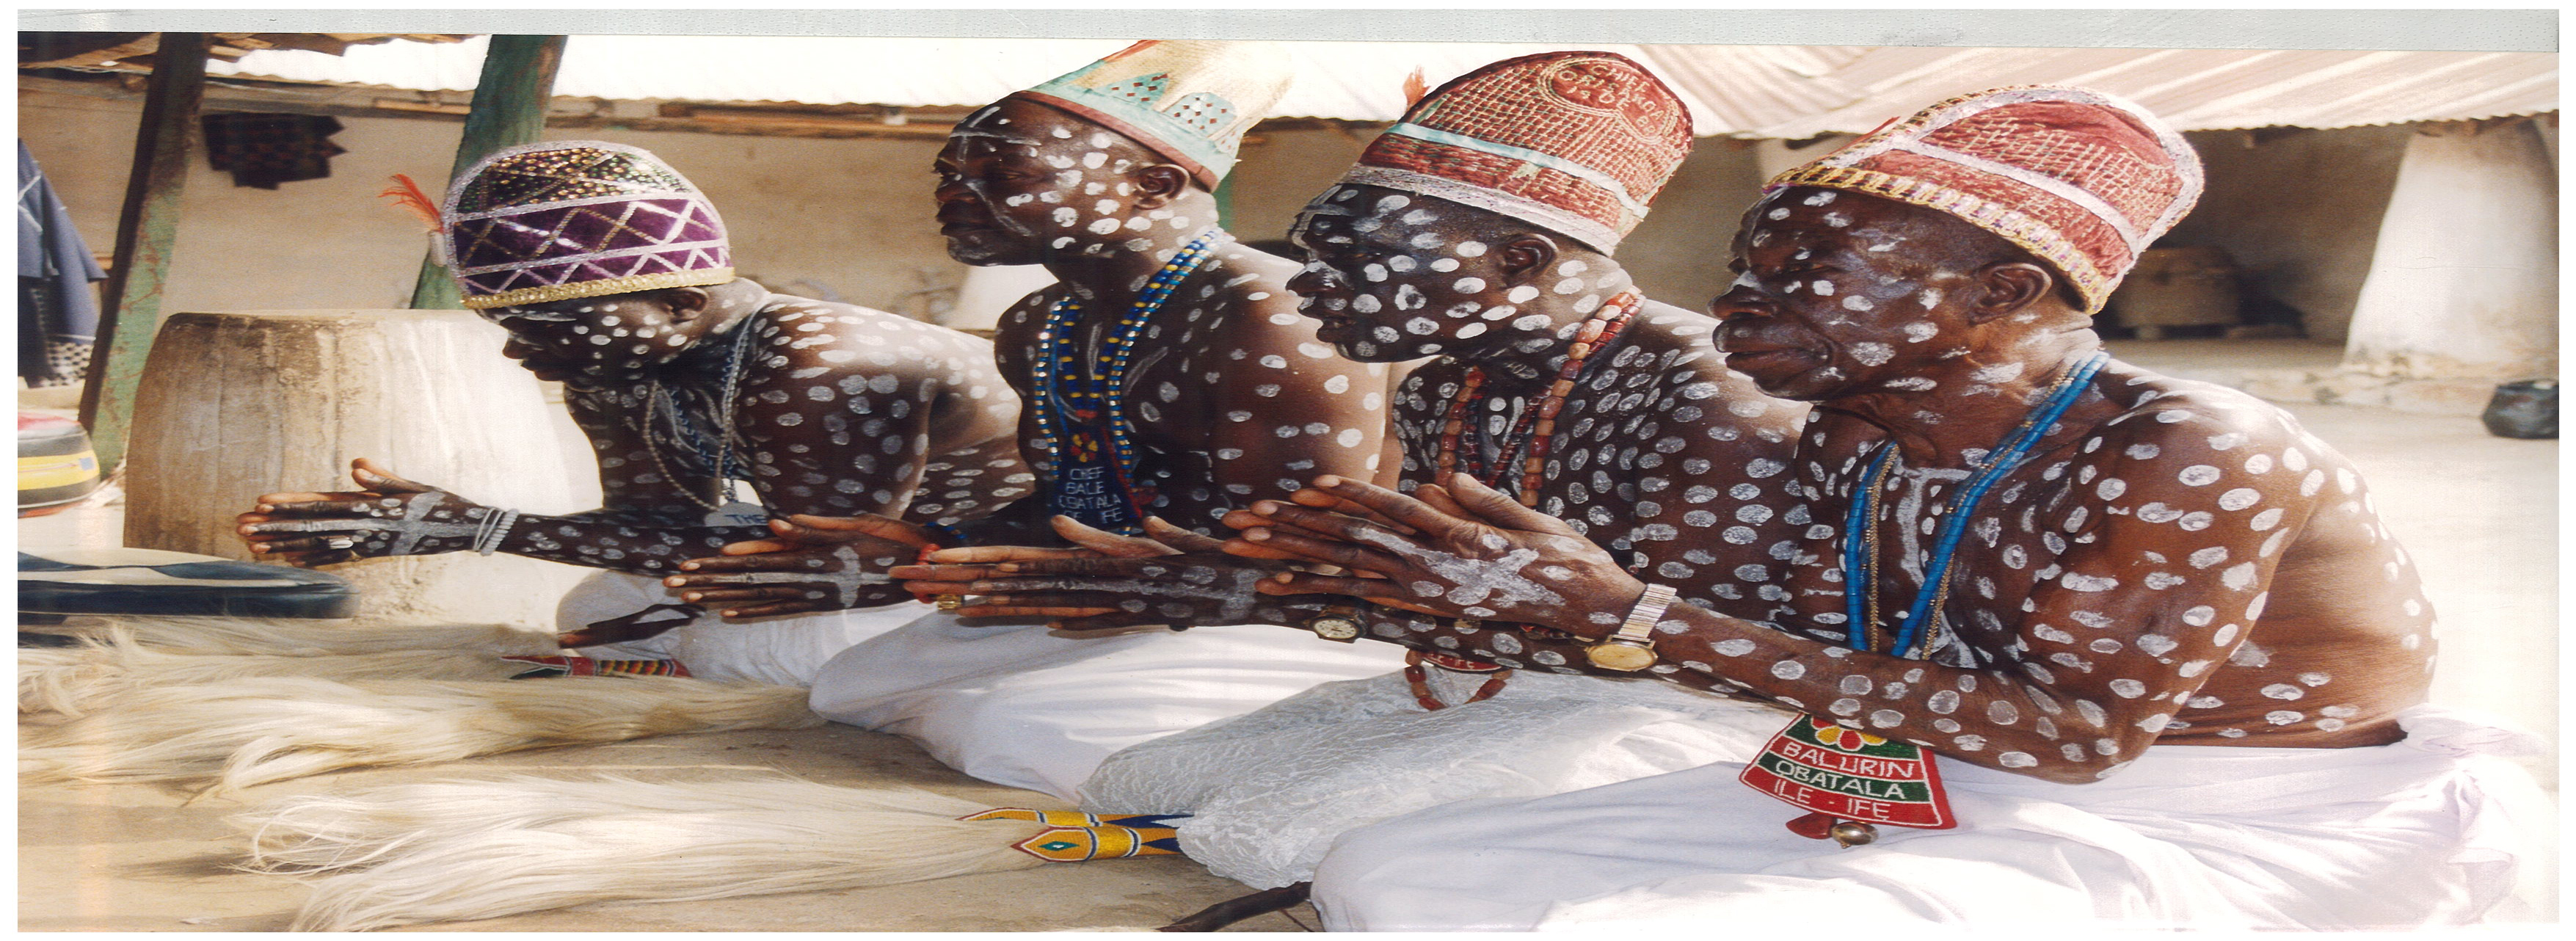 OrijoReporter.com, traditional worshippers